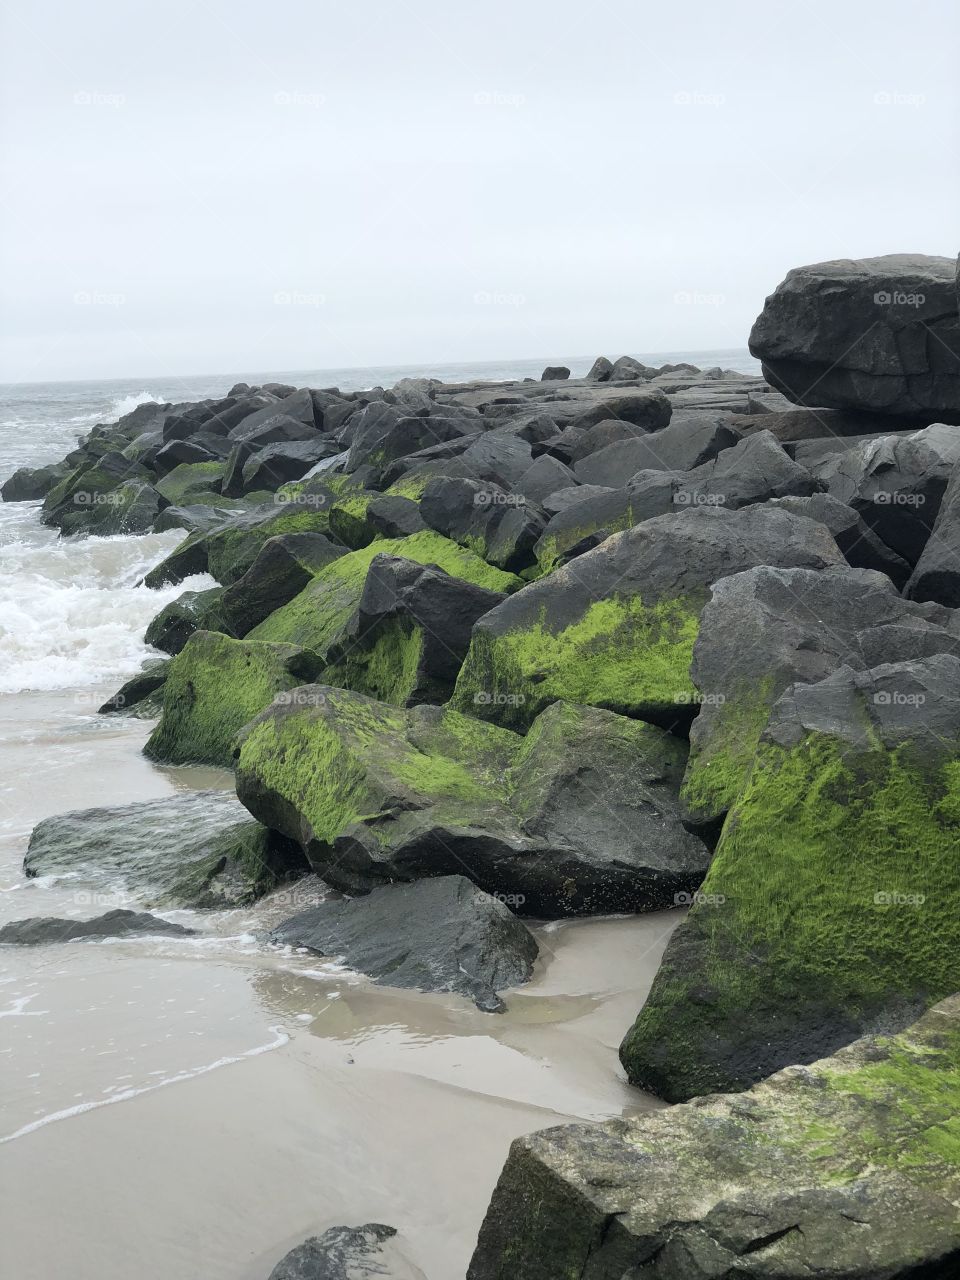 Angle view of the rock formation covered in moss located along the ocean waves 